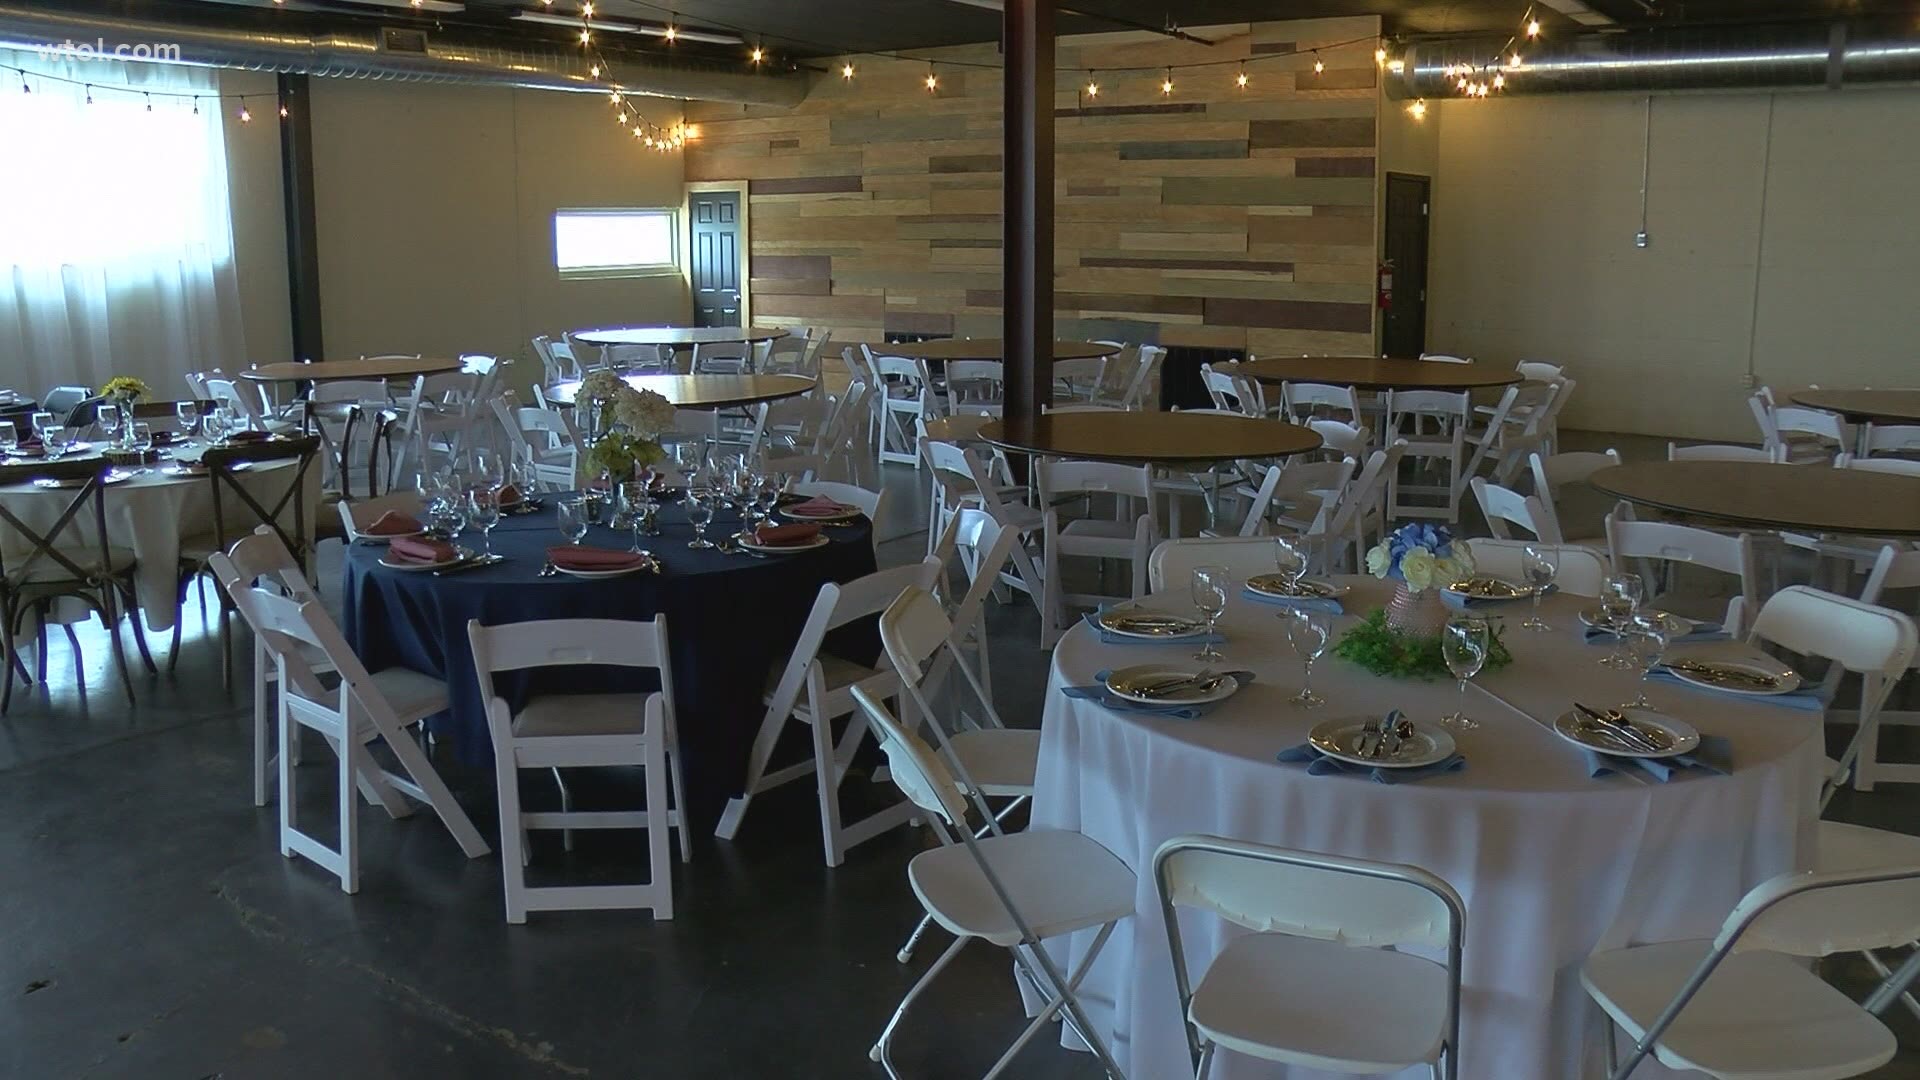 The move is an effort to thwart the spread of COVID-19 at wedding receptions, funeral repasts, and other events at banquet facilities. It goes into effect Tuesday.